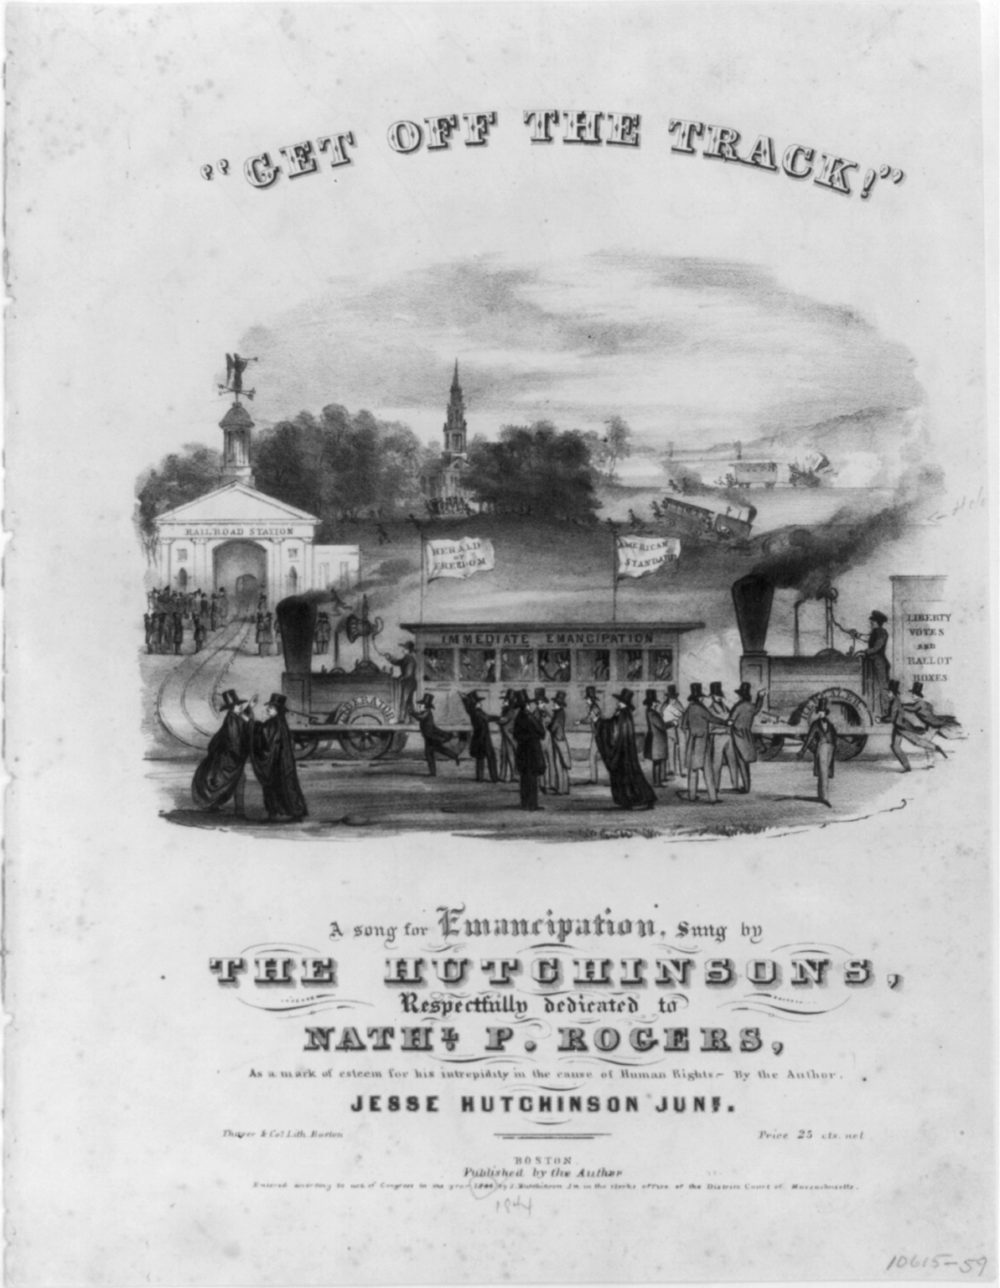 Jesse Hutchinson and B.W. Thayer & Co, “’Get off the track!’ A song for emancipation, sung by The Hutchinsons,” 1844, via Library of Congress.